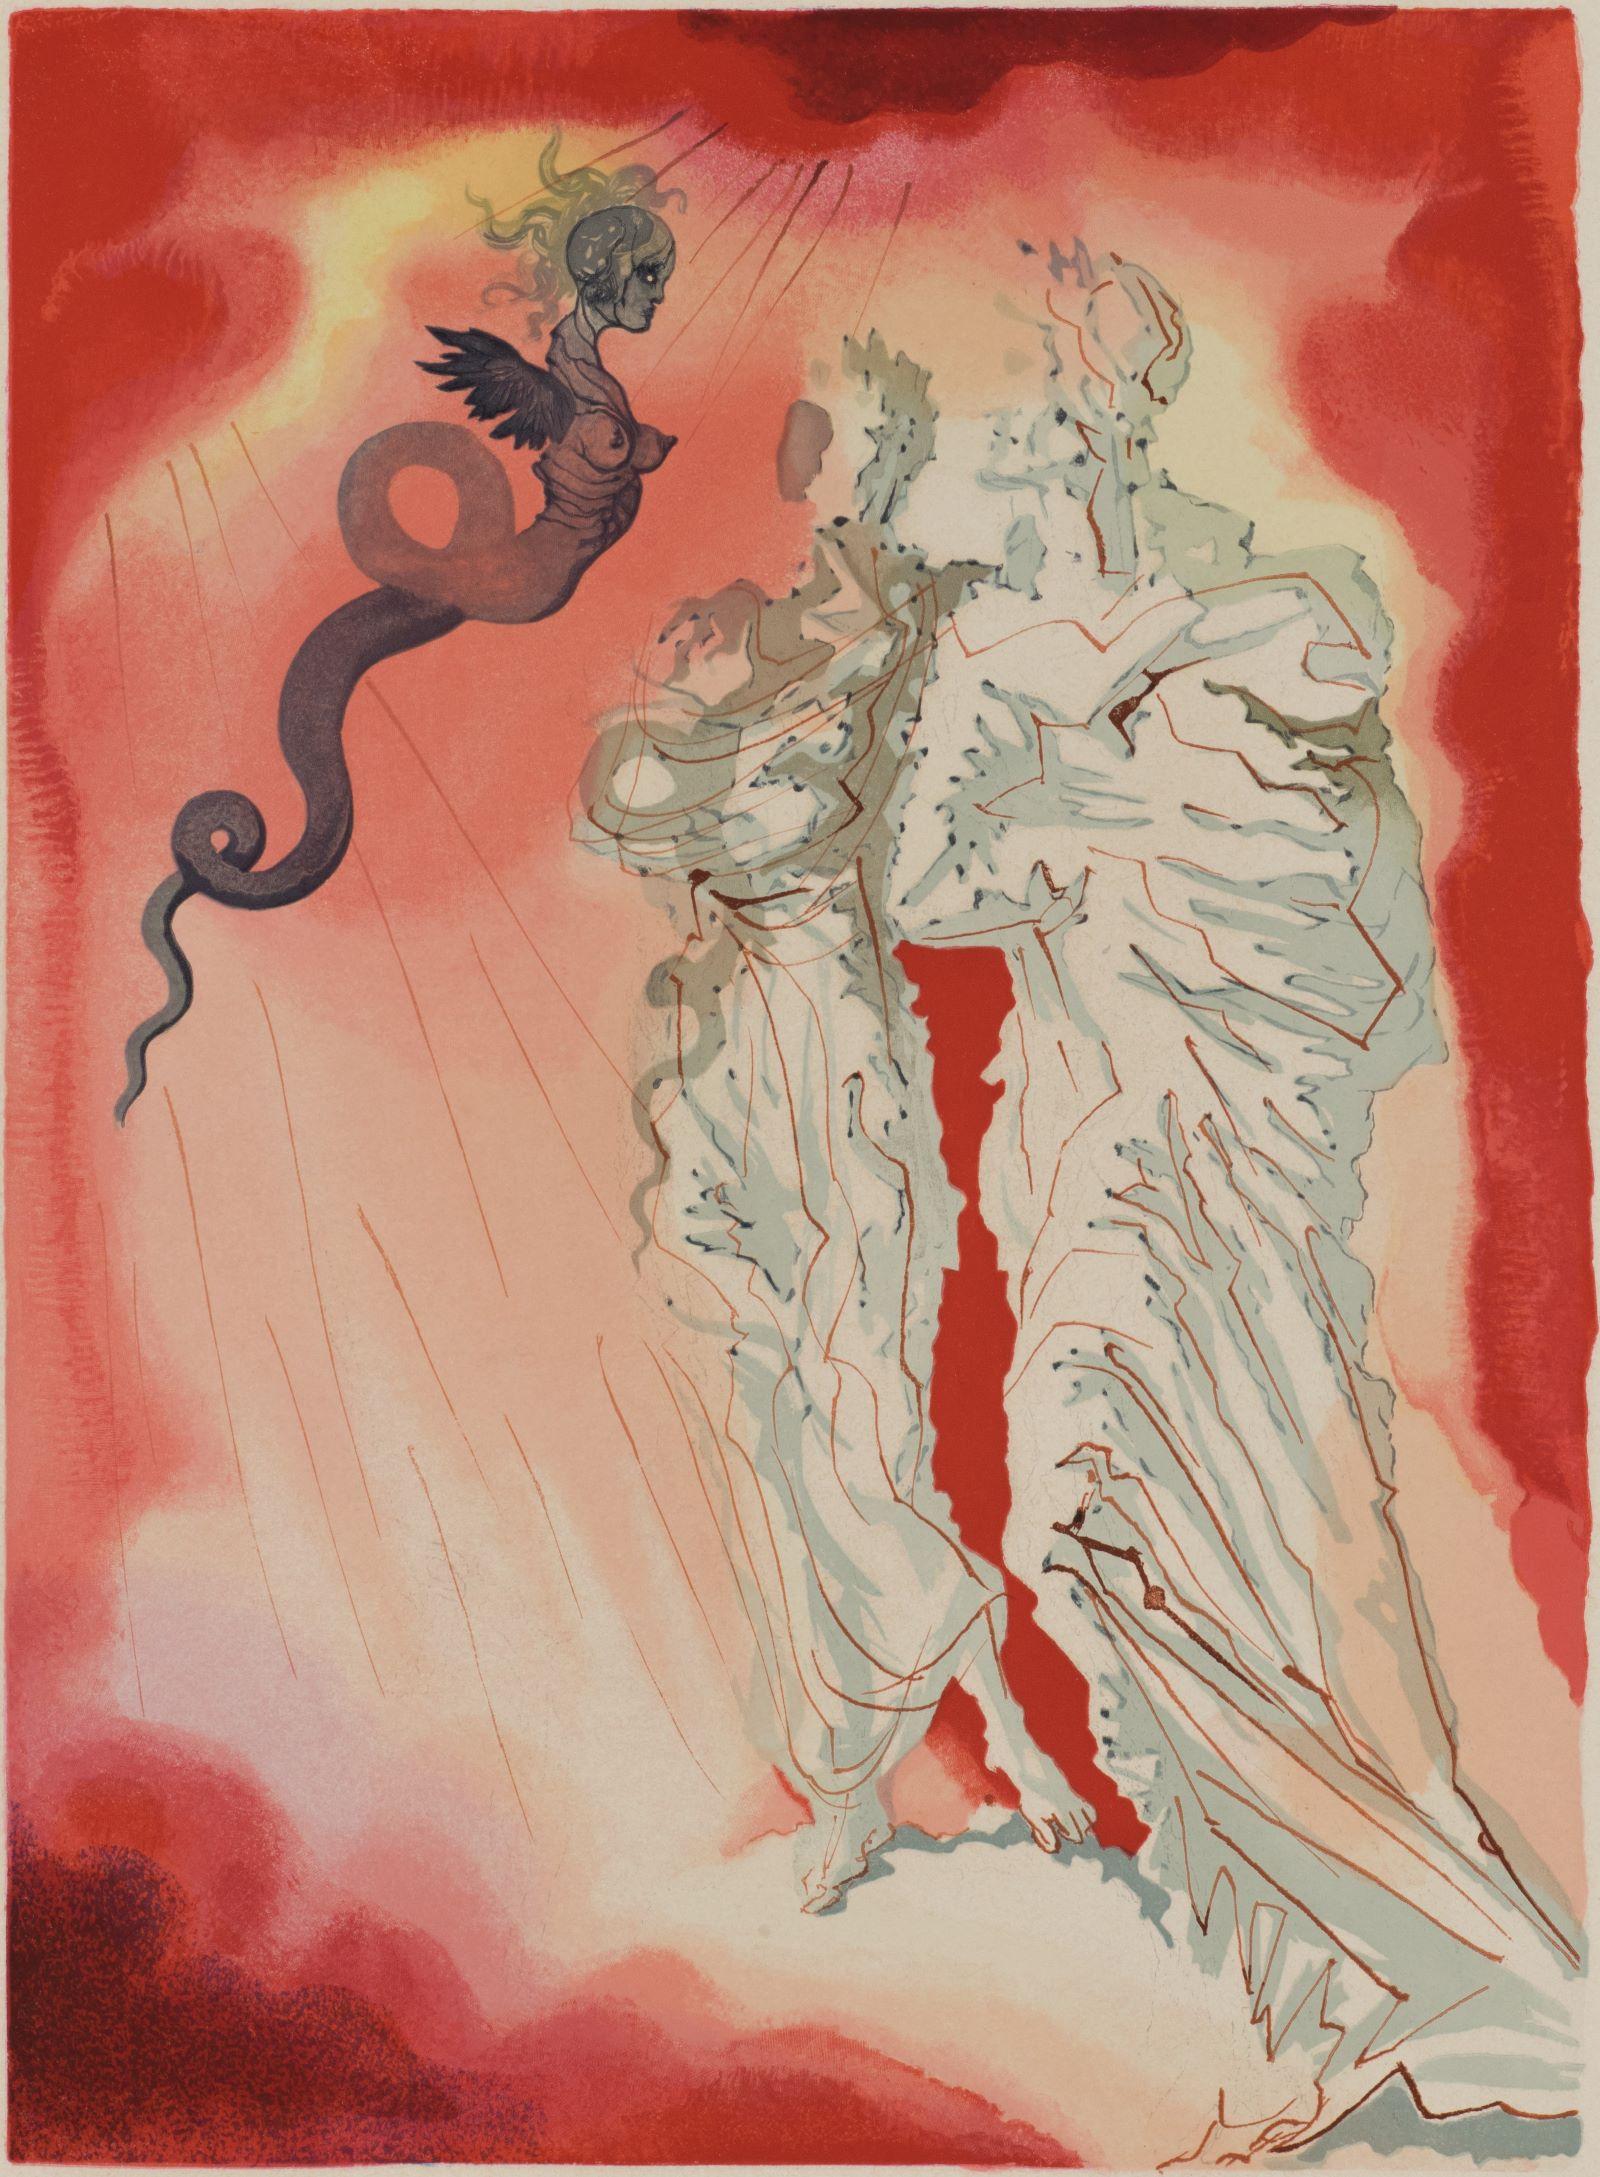 Hell Canto 17 (The Divine Comedy) - Surrealist Print by Salvador Dalí